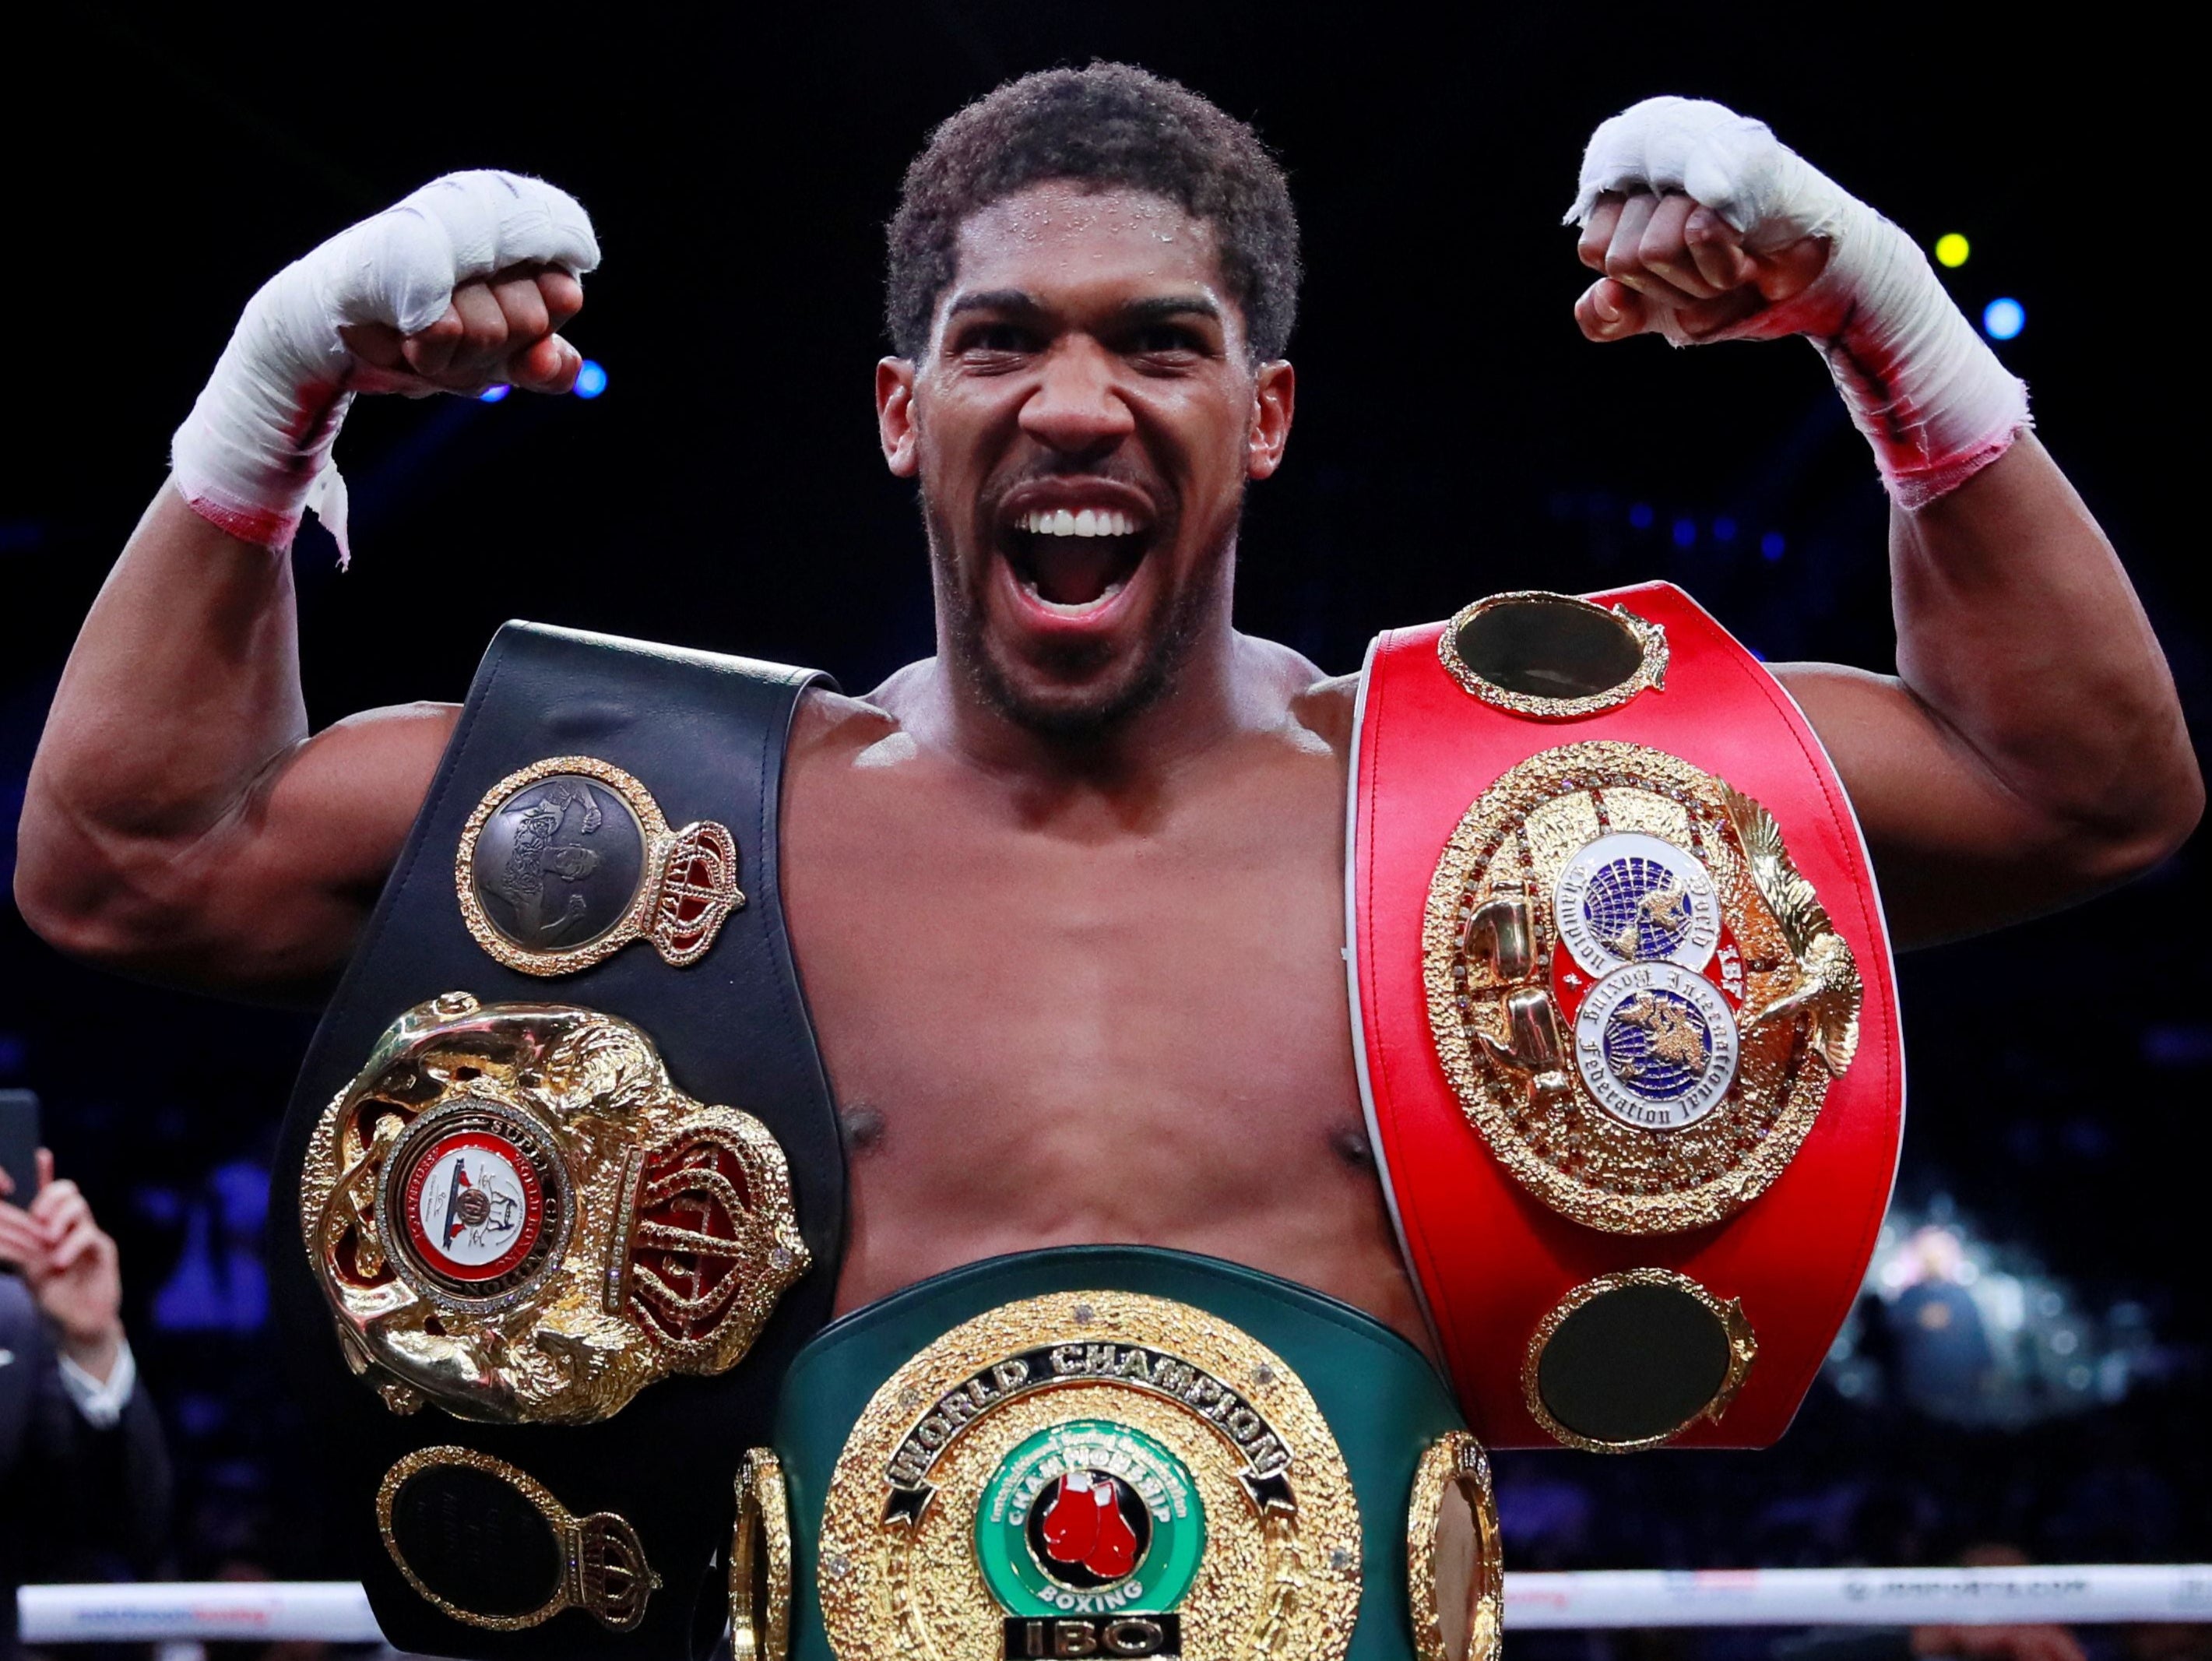 Joshua is due to defend his world titles against Pulev on 12 December